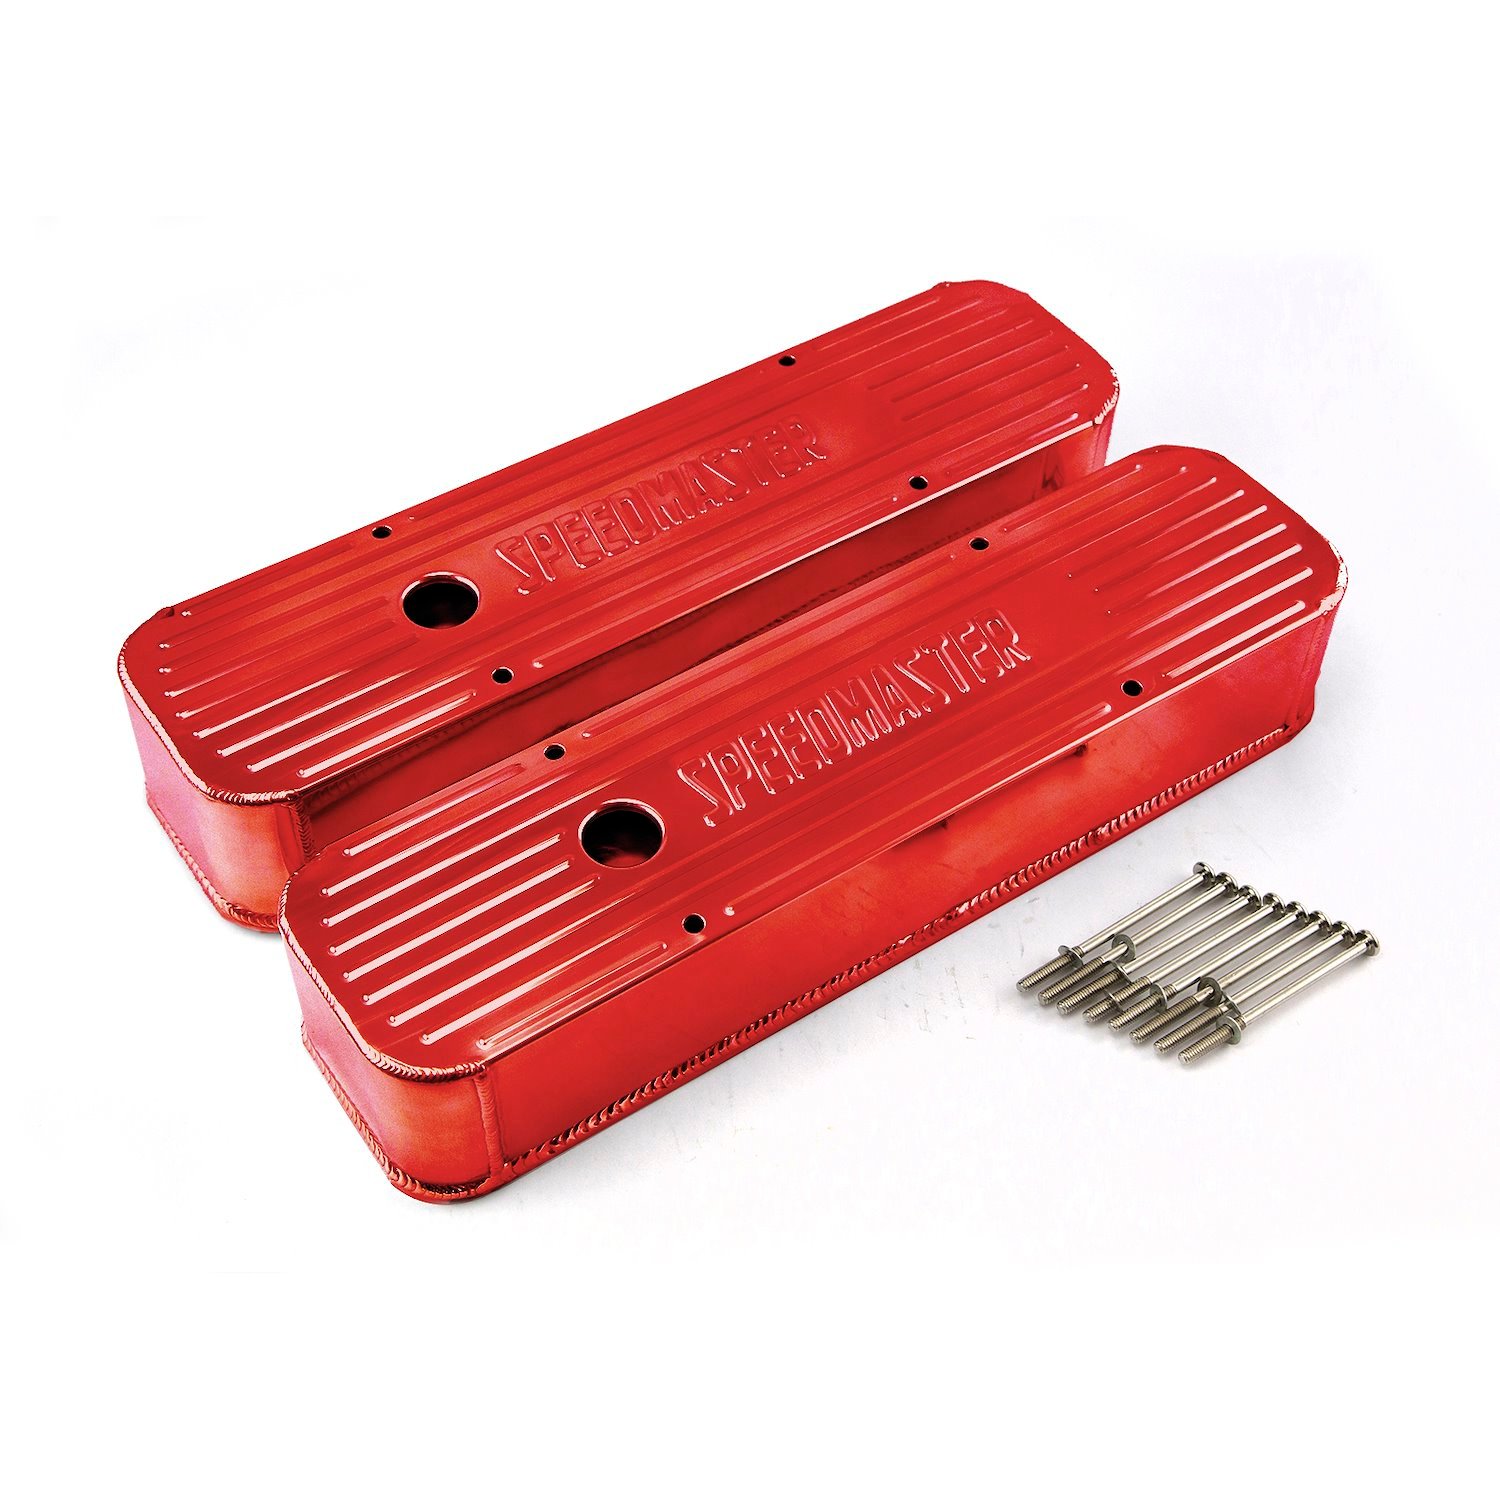 PCE314.1099.04 Chevy SBC 350 Red Anodized Fabricated Valve Covers - Tall w/ Hole